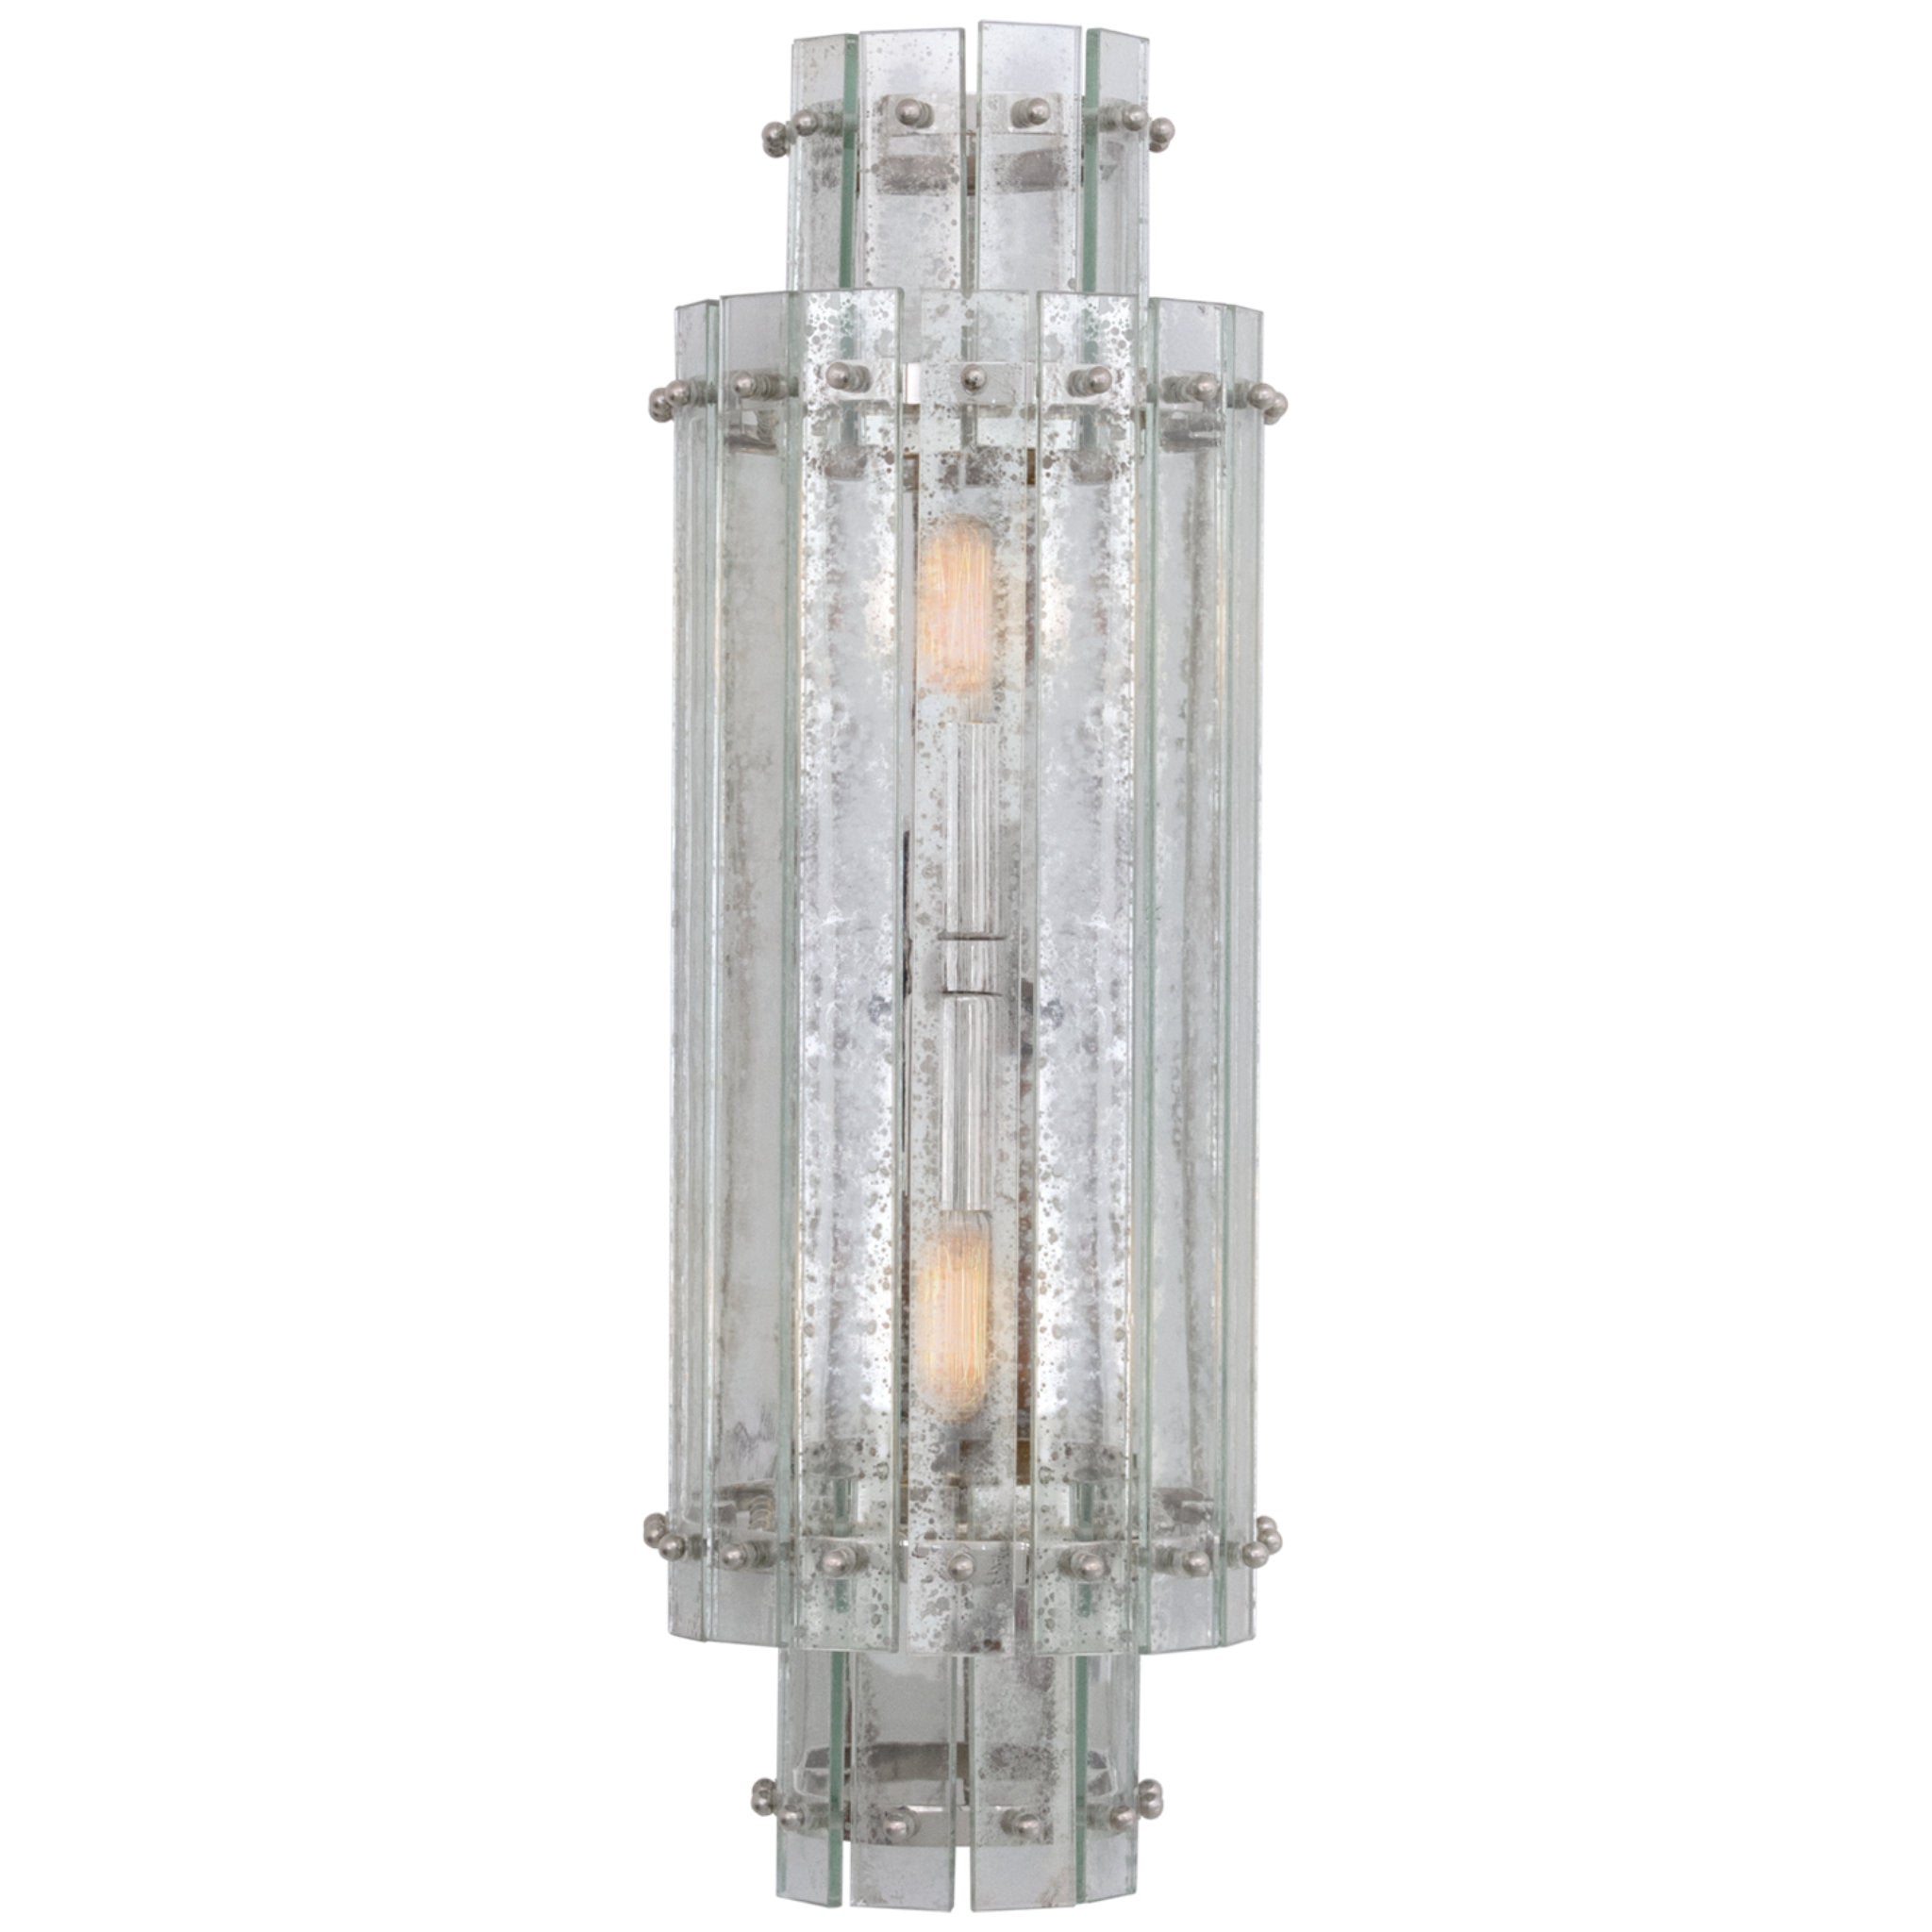 Carrier and Company Cadence Large Tiered Sconce in Polished Nickel with Antique Mirror